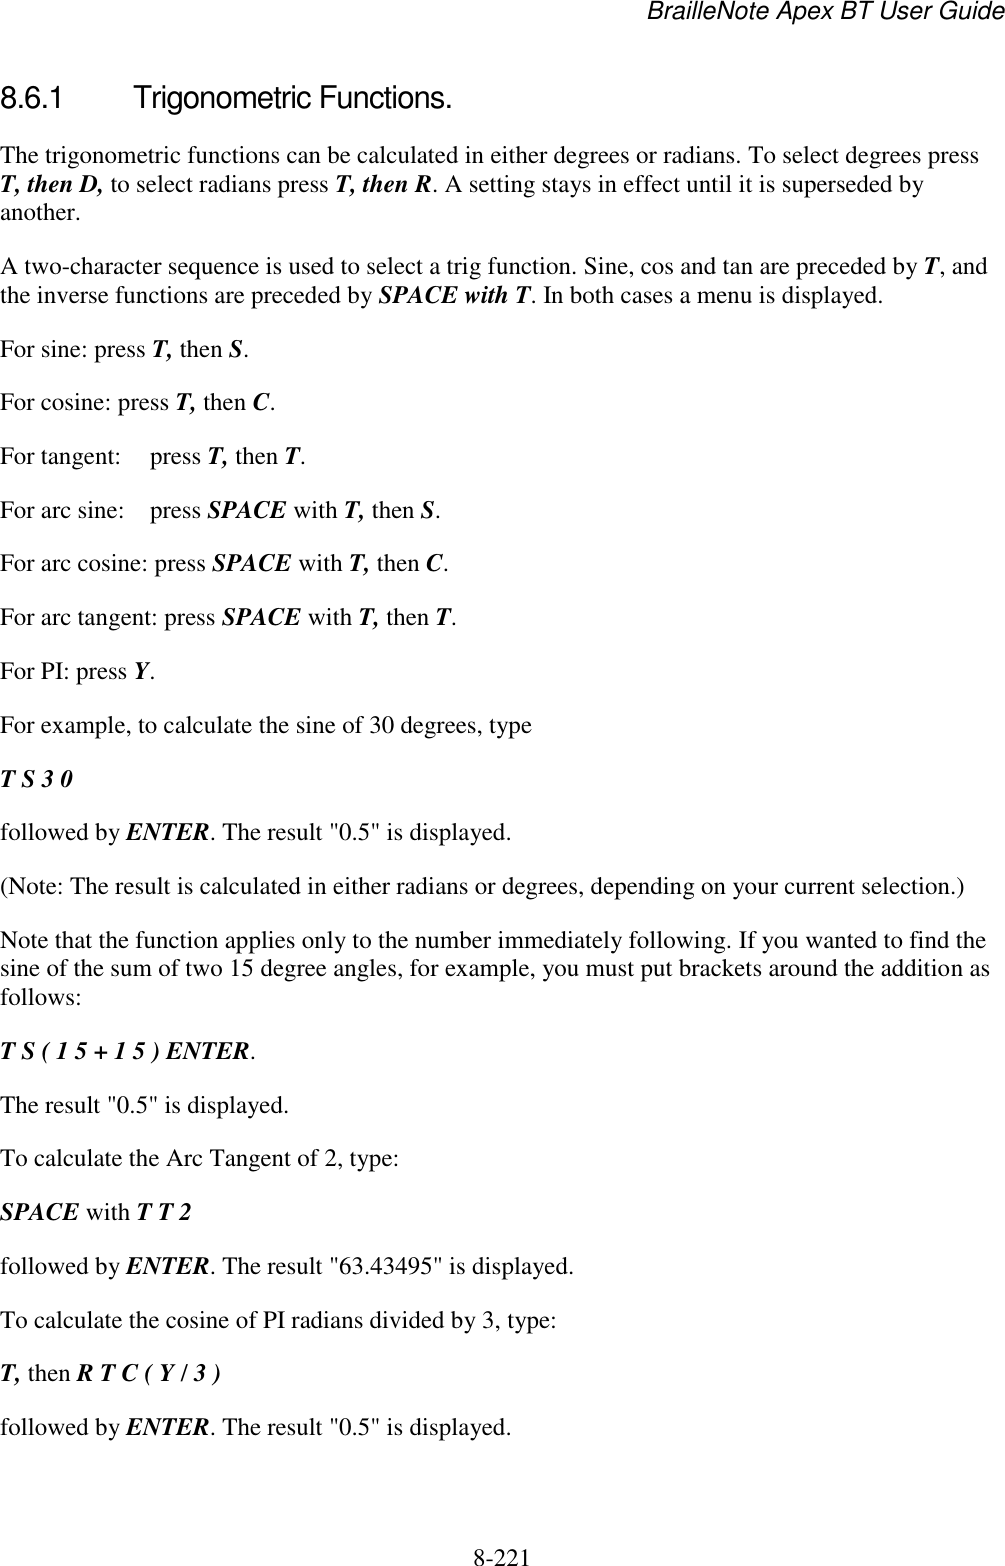 BrailleNote Apex BT User Guide   8-221   8.6.1  Trigonometric Functions. The trigonometric functions can be calculated in either degrees or radians. To select degrees press T, then D, to select radians press T, then R. A setting stays in effect until it is superseded by another. A two-character sequence is used to select a trig function. Sine, cos and tan are preceded by T, and the inverse functions are preceded by SPACE with T. In both cases a menu is displayed. For sine: press T, then S.  For cosine: press T, then C.  For tangent:  press T, then T.  For arc sine:  press SPACE with T, then S.  For arc cosine: press SPACE with T, then C.  For arc tangent: press SPACE with T, then T.  For PI: press Y.  For example, to calculate the sine of 30 degrees, type  T S 3 0 followed by ENTER. The result &quot;0.5&quot; is displayed.  (Note: The result is calculated in either radians or degrees, depending on your current selection.) Note that the function applies only to the number immediately following. If you wanted to find the sine of the sum of two 15 degree angles, for example, you must put brackets around the addition as follows: T S ( 1 5 + 1 5 ) ENTER. The result &quot;0.5&quot; is displayed.  To calculate the Arc Tangent of 2, type: SPACE with T T 2 followed by ENTER. The result &quot;63.43495&quot; is displayed. To calculate the cosine of PI radians divided by 3, type: T, then R T C ( Y / 3 ) followed by ENTER. The result &quot;0.5&quot; is displayed.  